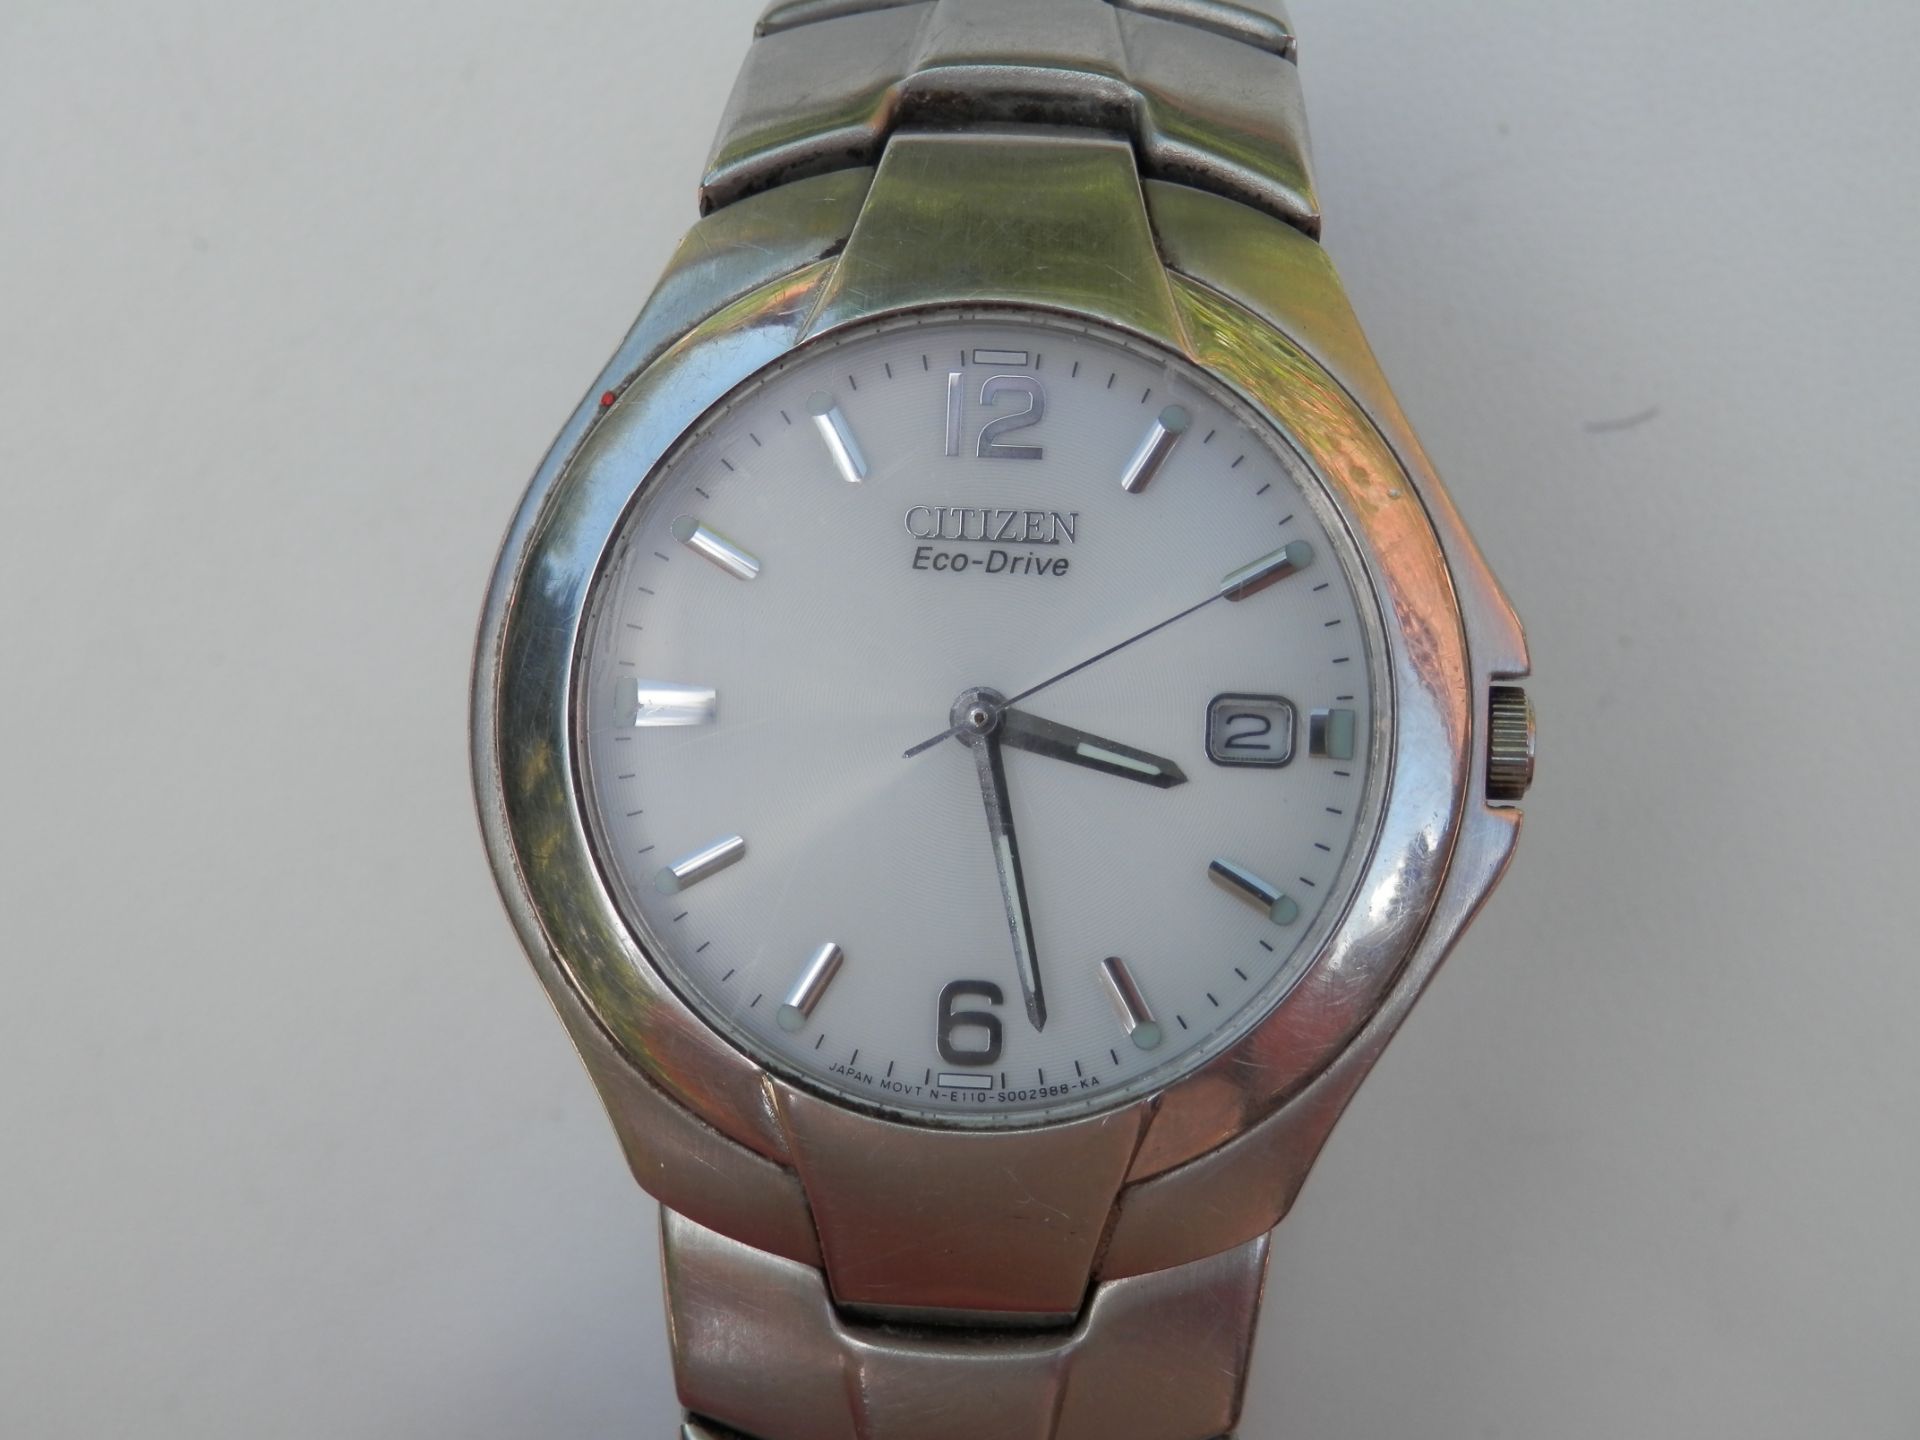 FULL STAINLESS GENTS CITIZEN ECO DRIVE SOLAR POWERED DATE WATCH, WORKING WITH 8"+ STRAP. RRP £189. - Image 2 of 6